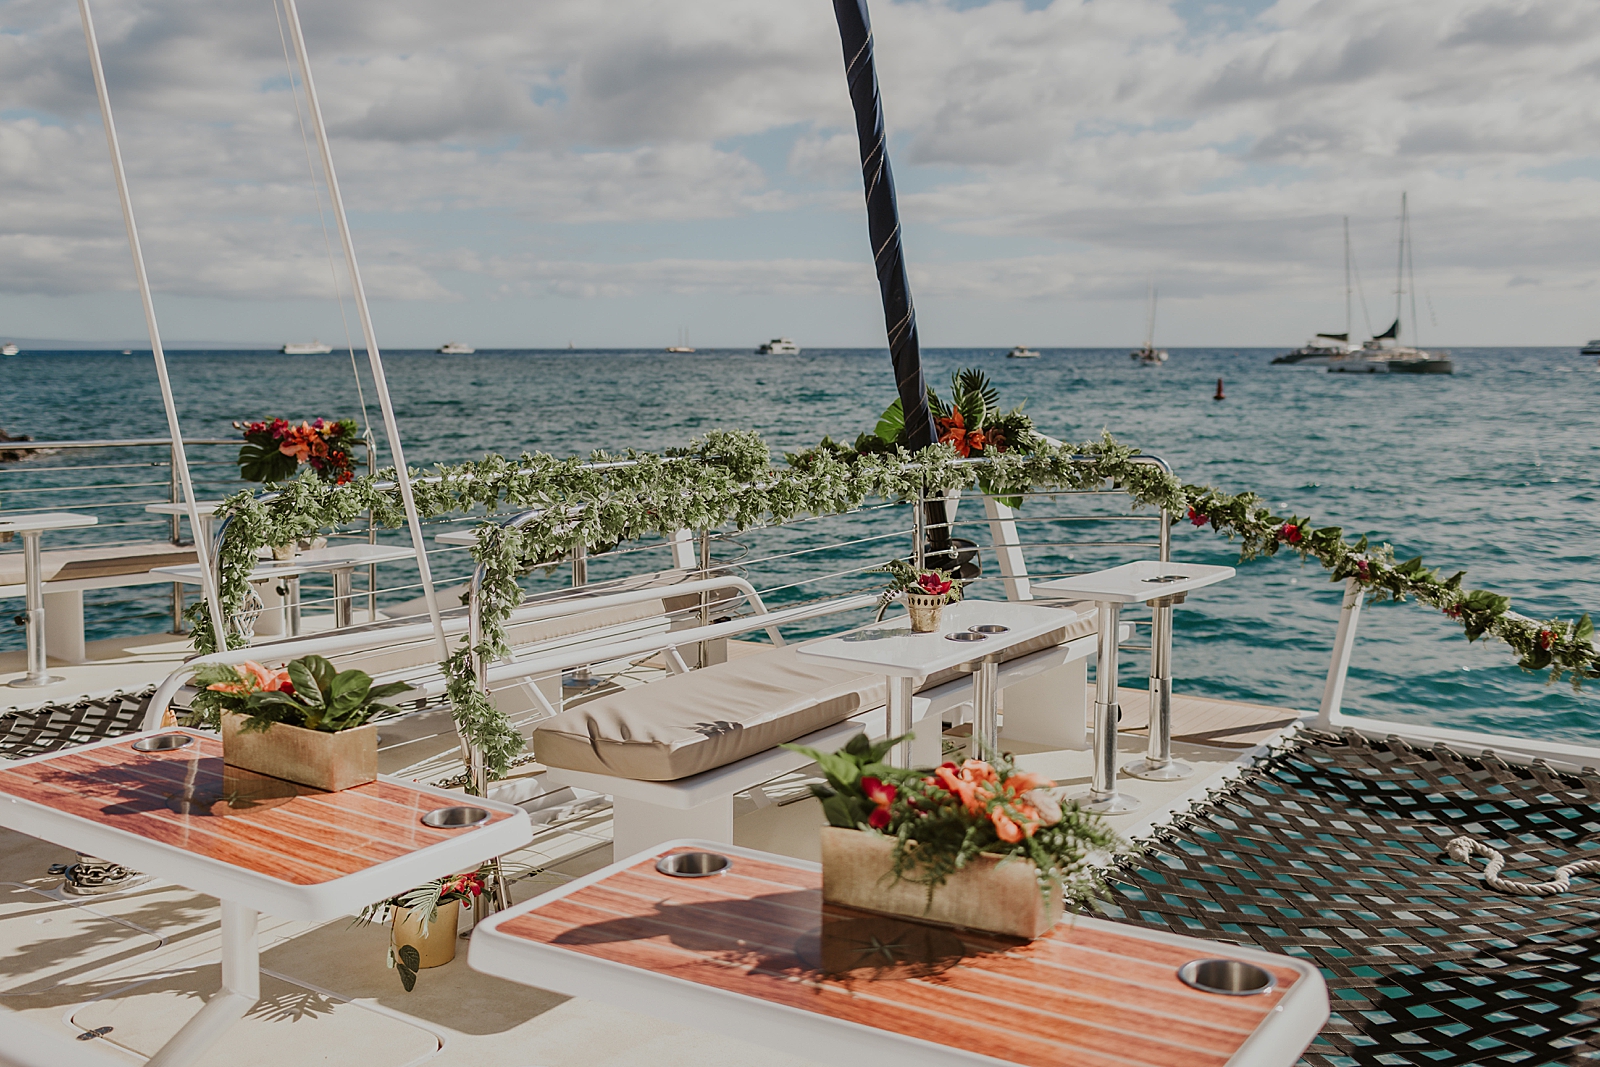 Detail shot of decorated yacht boat with greenery